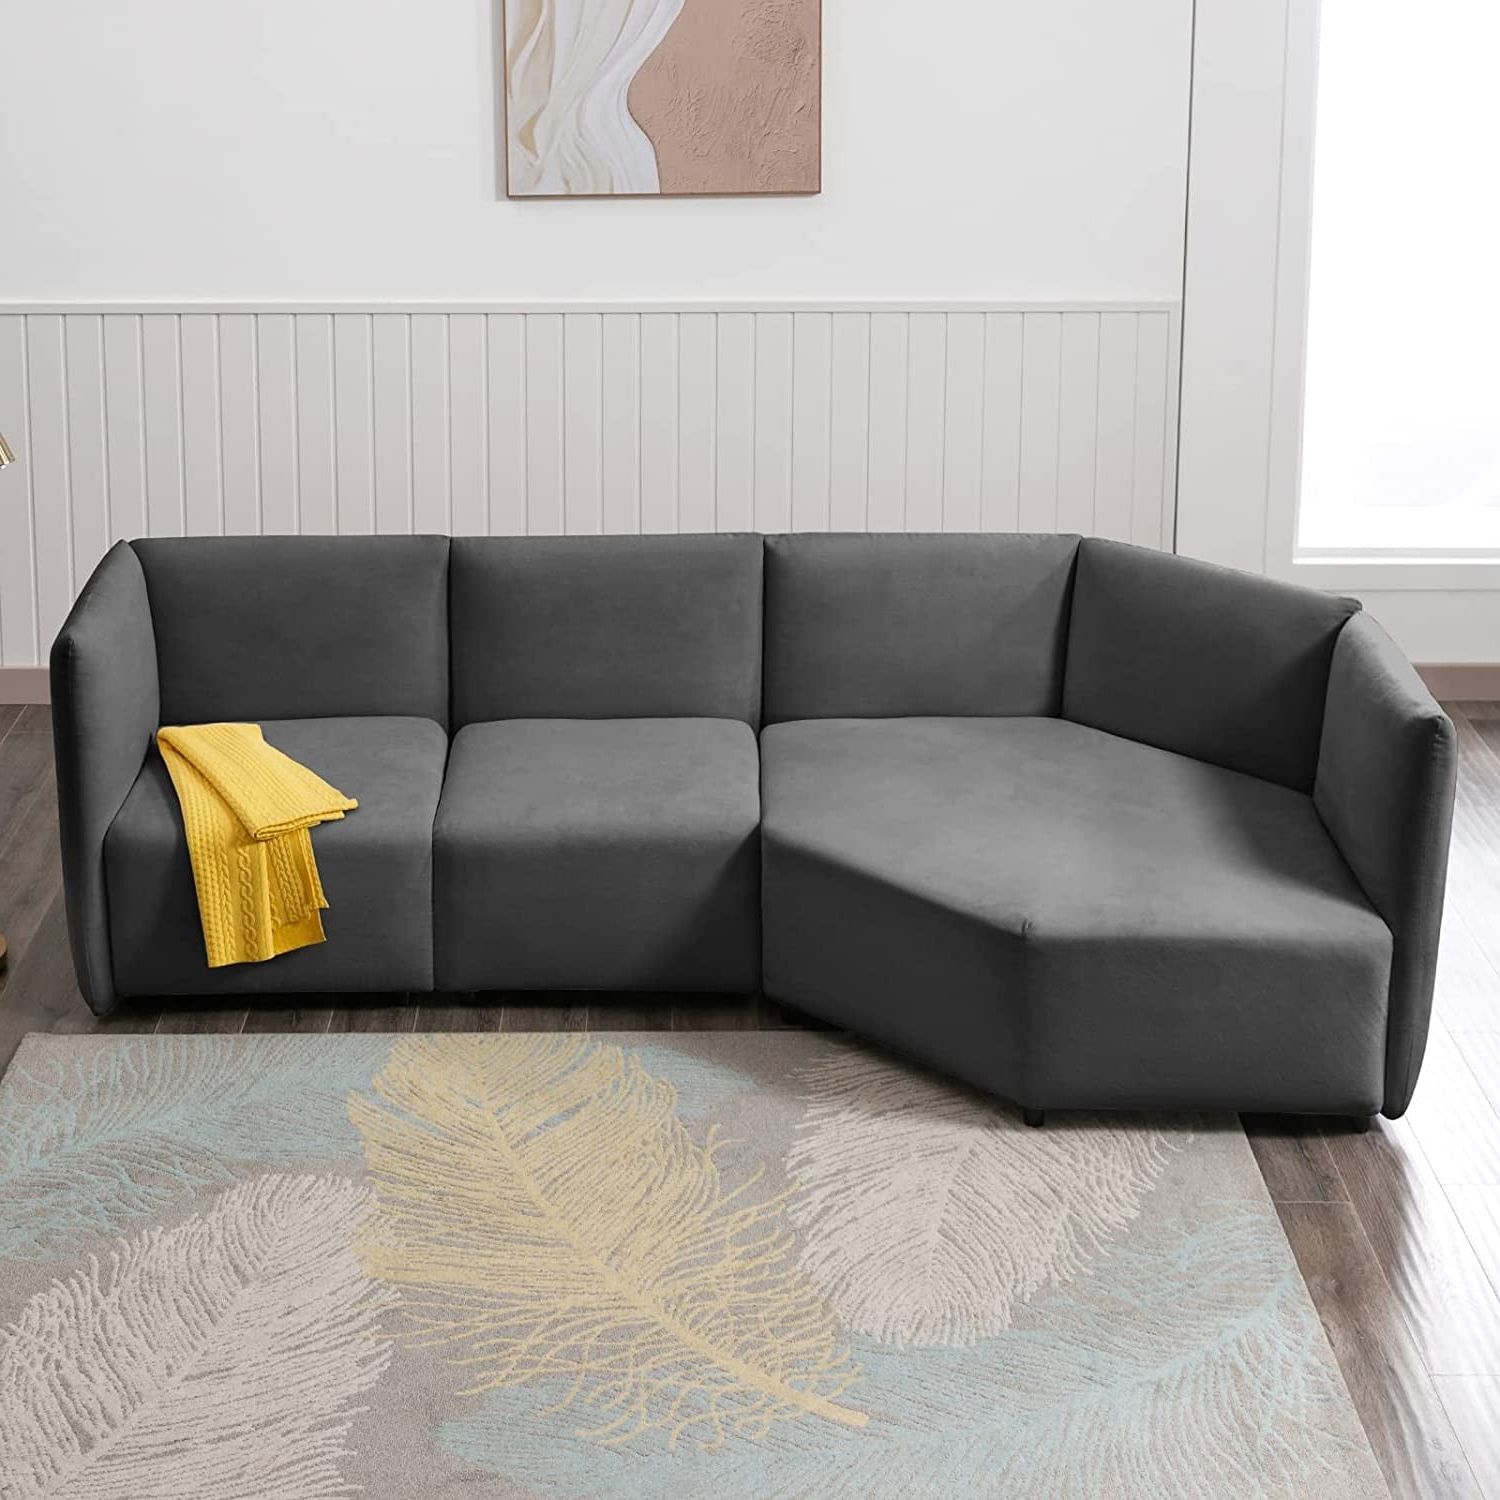 Mixoy Curved Sectional Sofa Couch With Adjustable Armrest And Backrest,   (View 16 of 20)